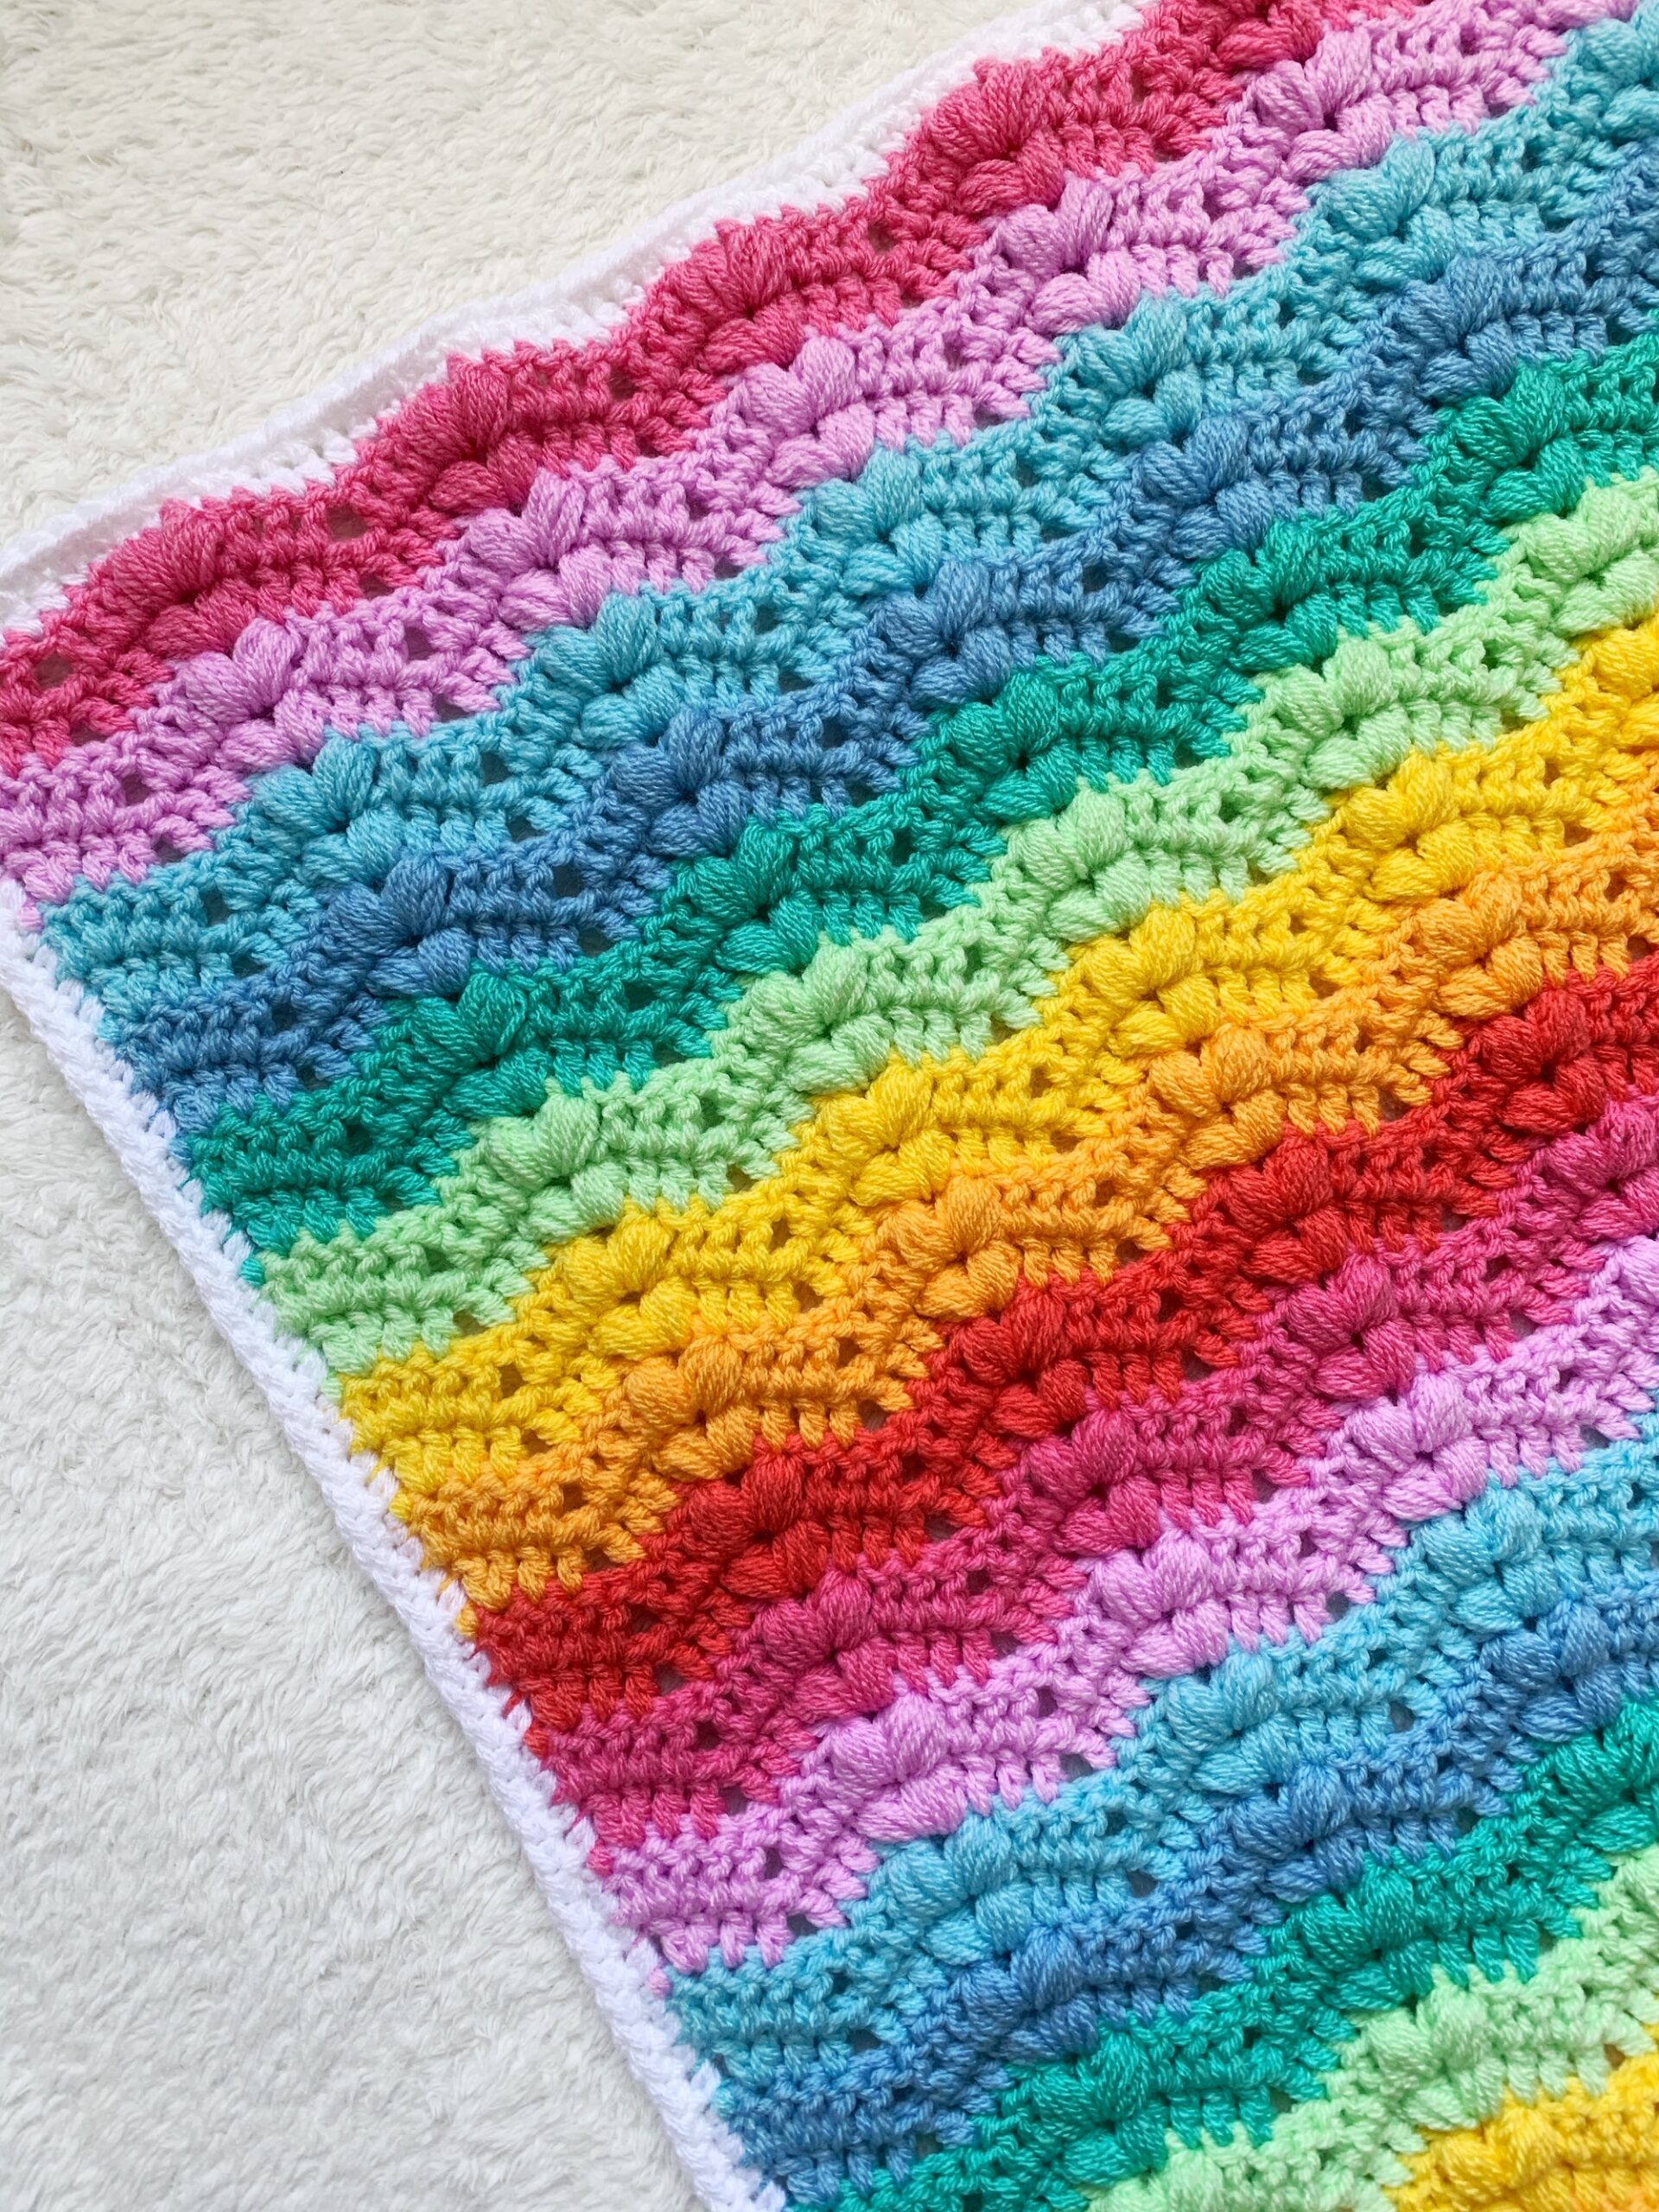 Bobbles and Blankets - This color is giving me ALL of the beachy